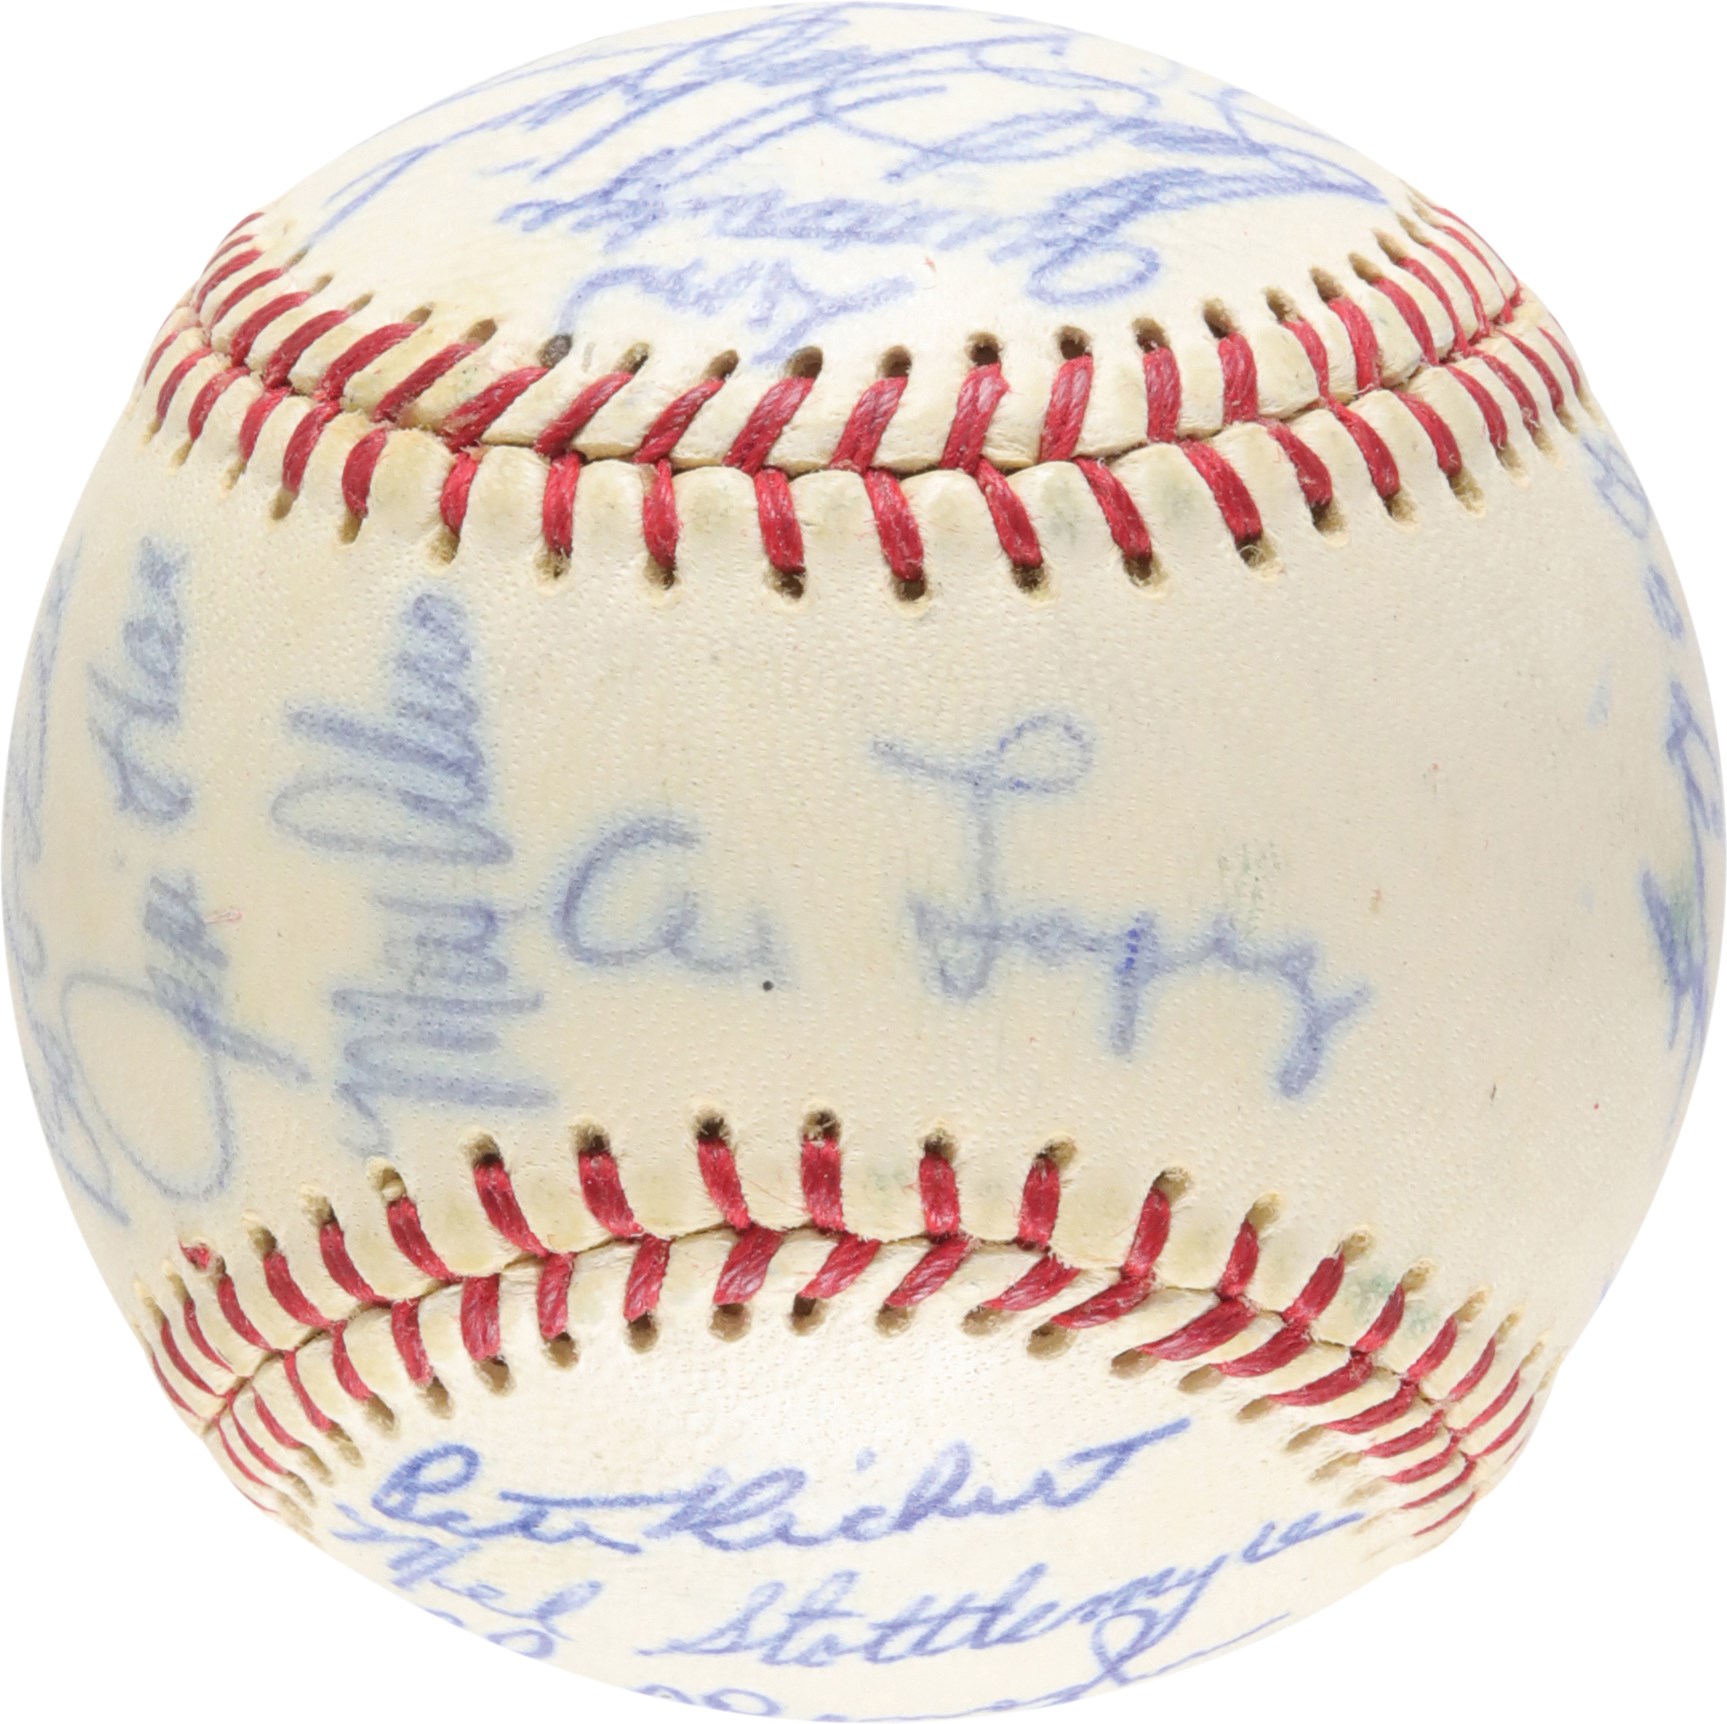 - 1965 American League All-Star Team-Signed Baseball (ex-Al Kaline Collection)